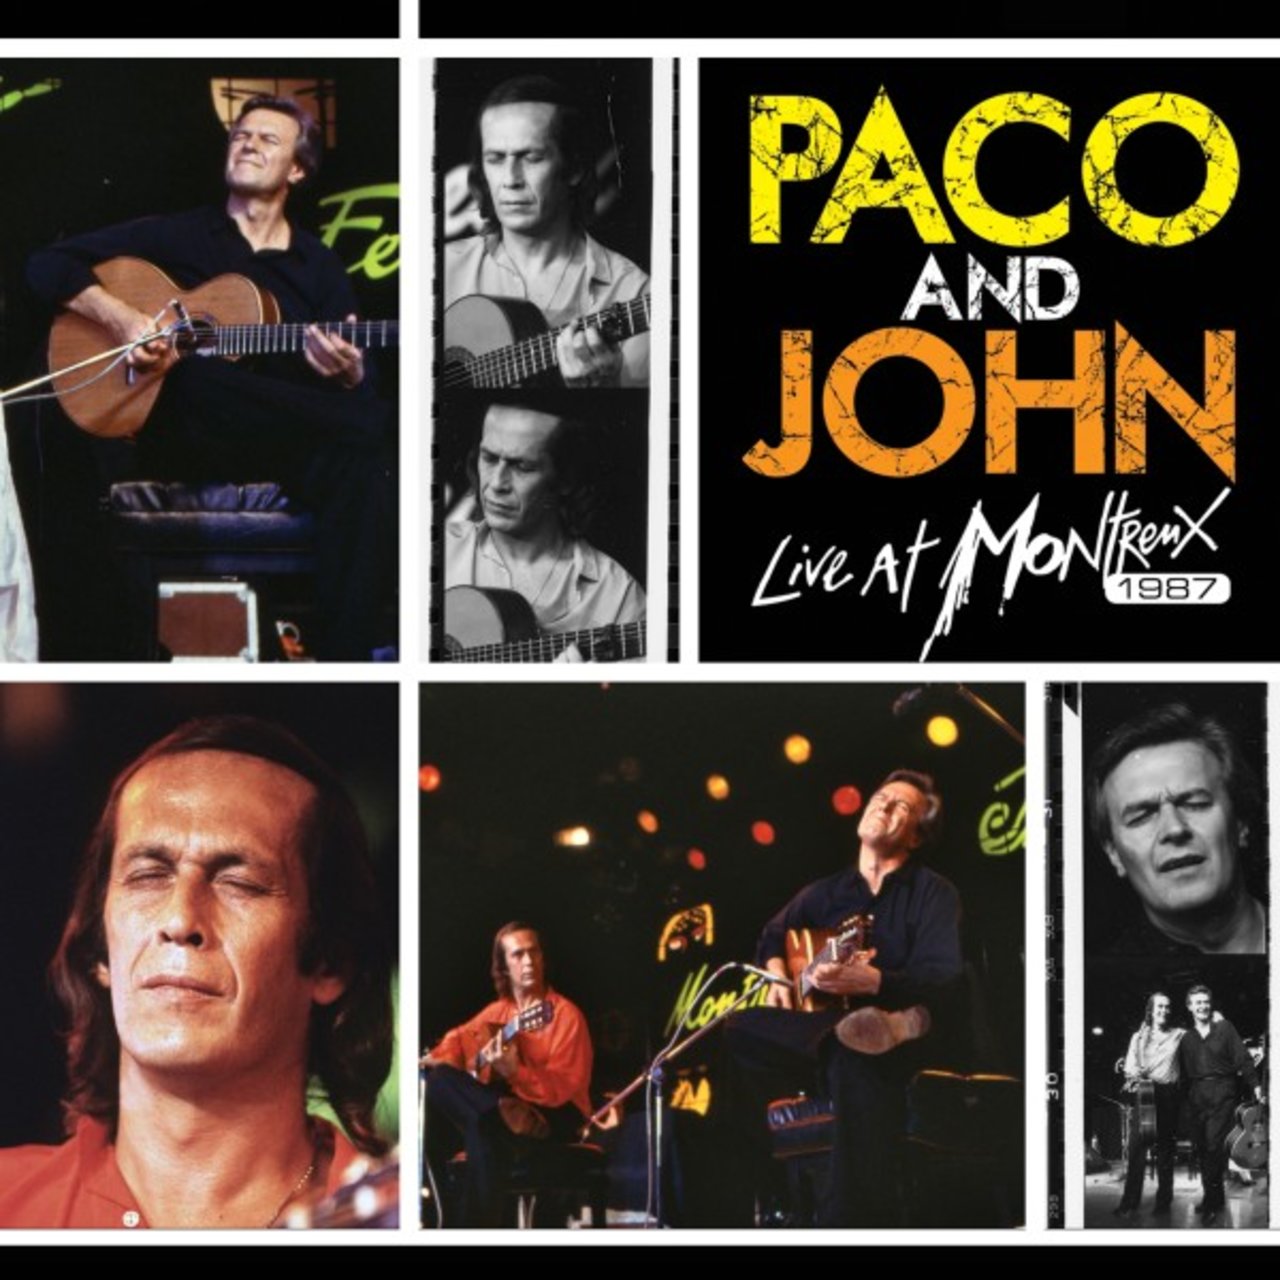 Paco and John Live at Montreux 1987 [2016]